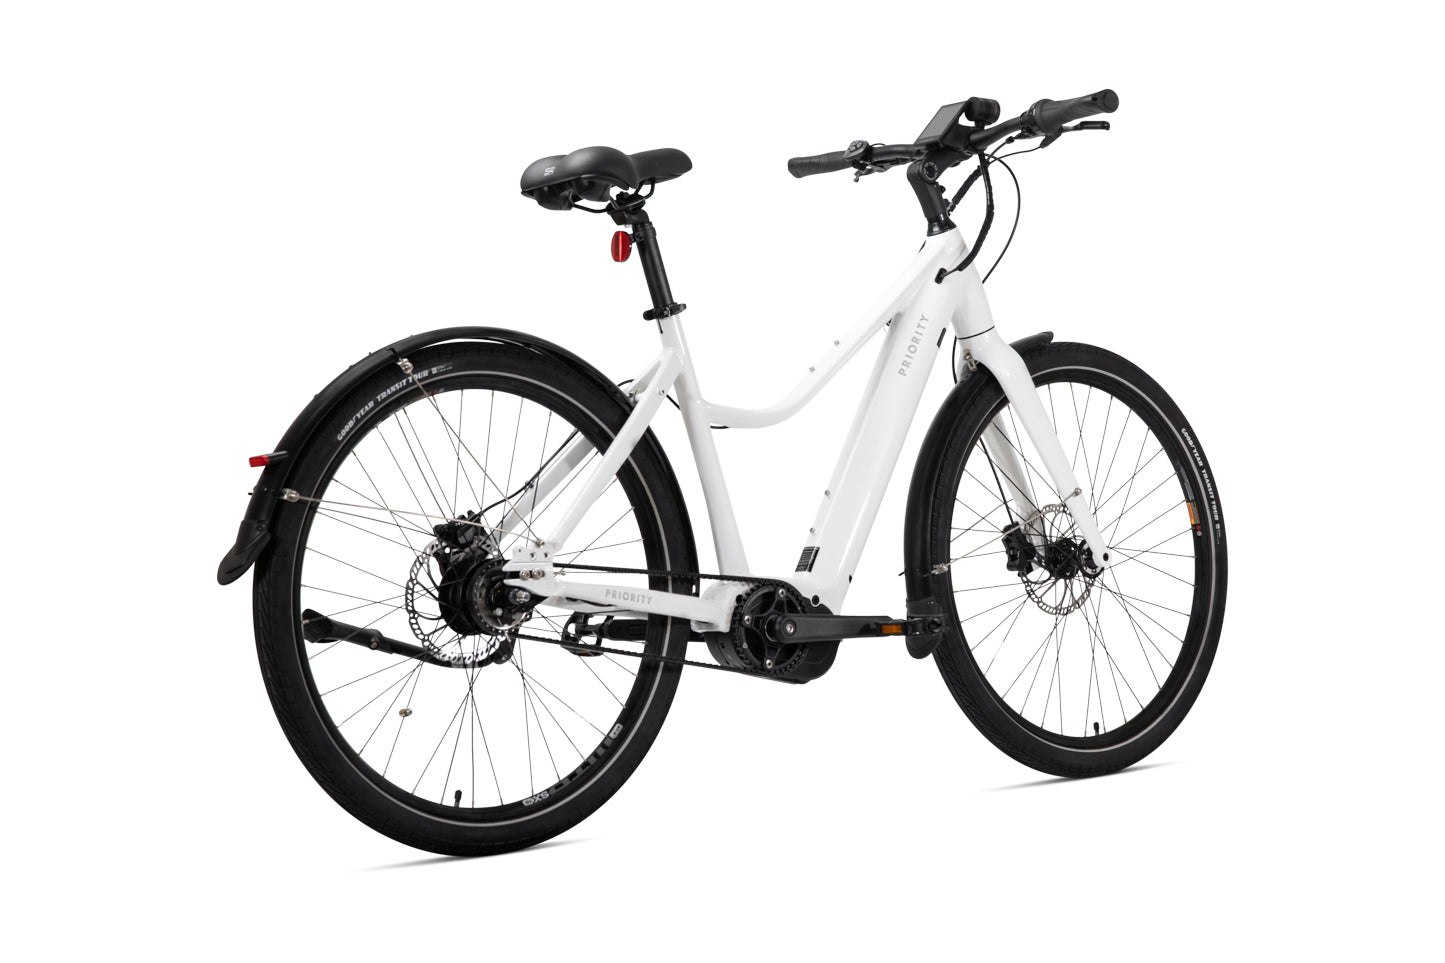 Video instruction and installation manual of tuning for e-bikes